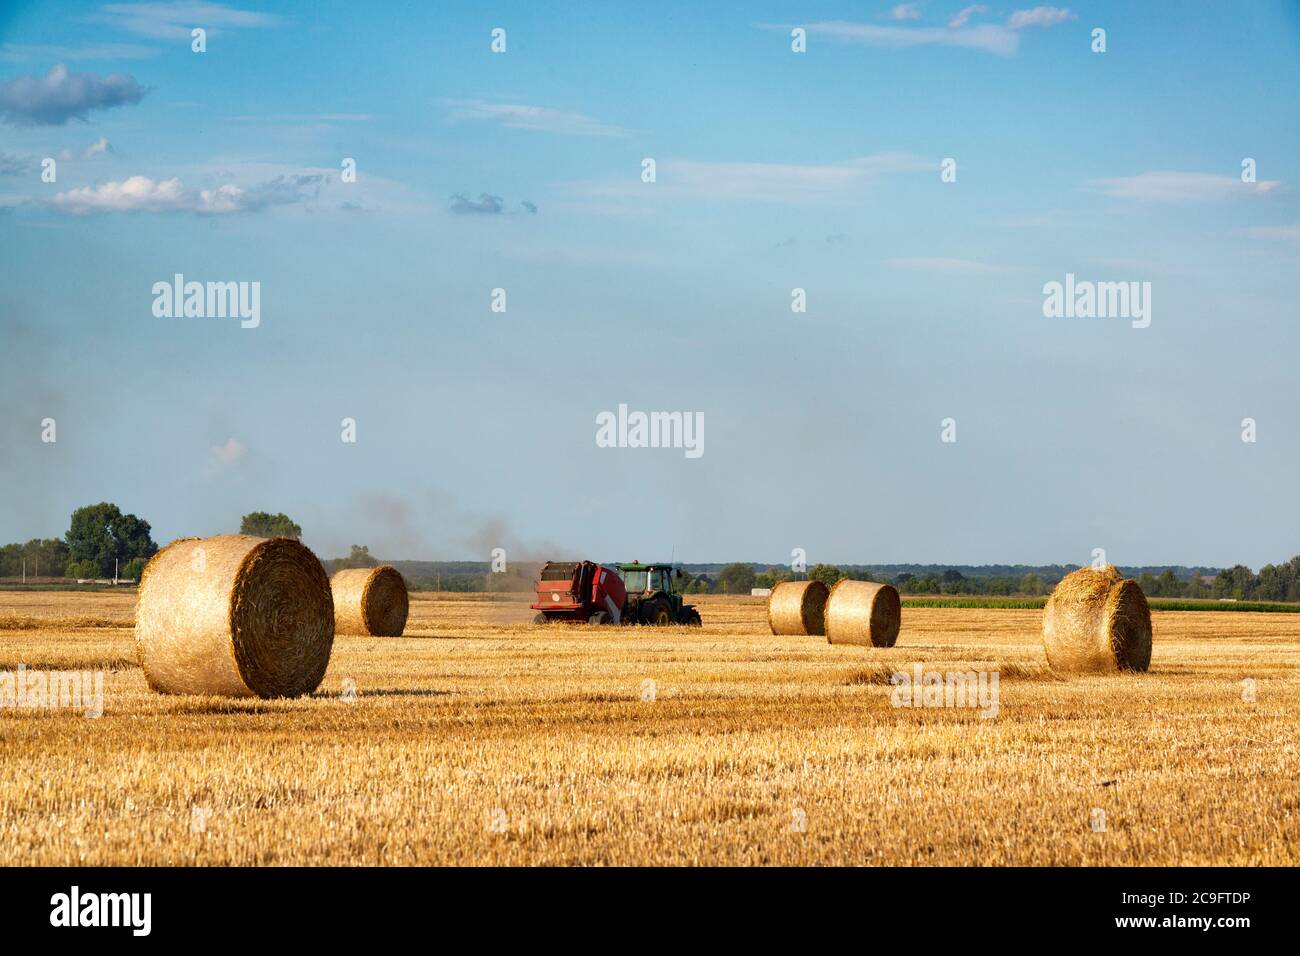 Cut wheat filed with tractor carrying hay bales Stock Photo